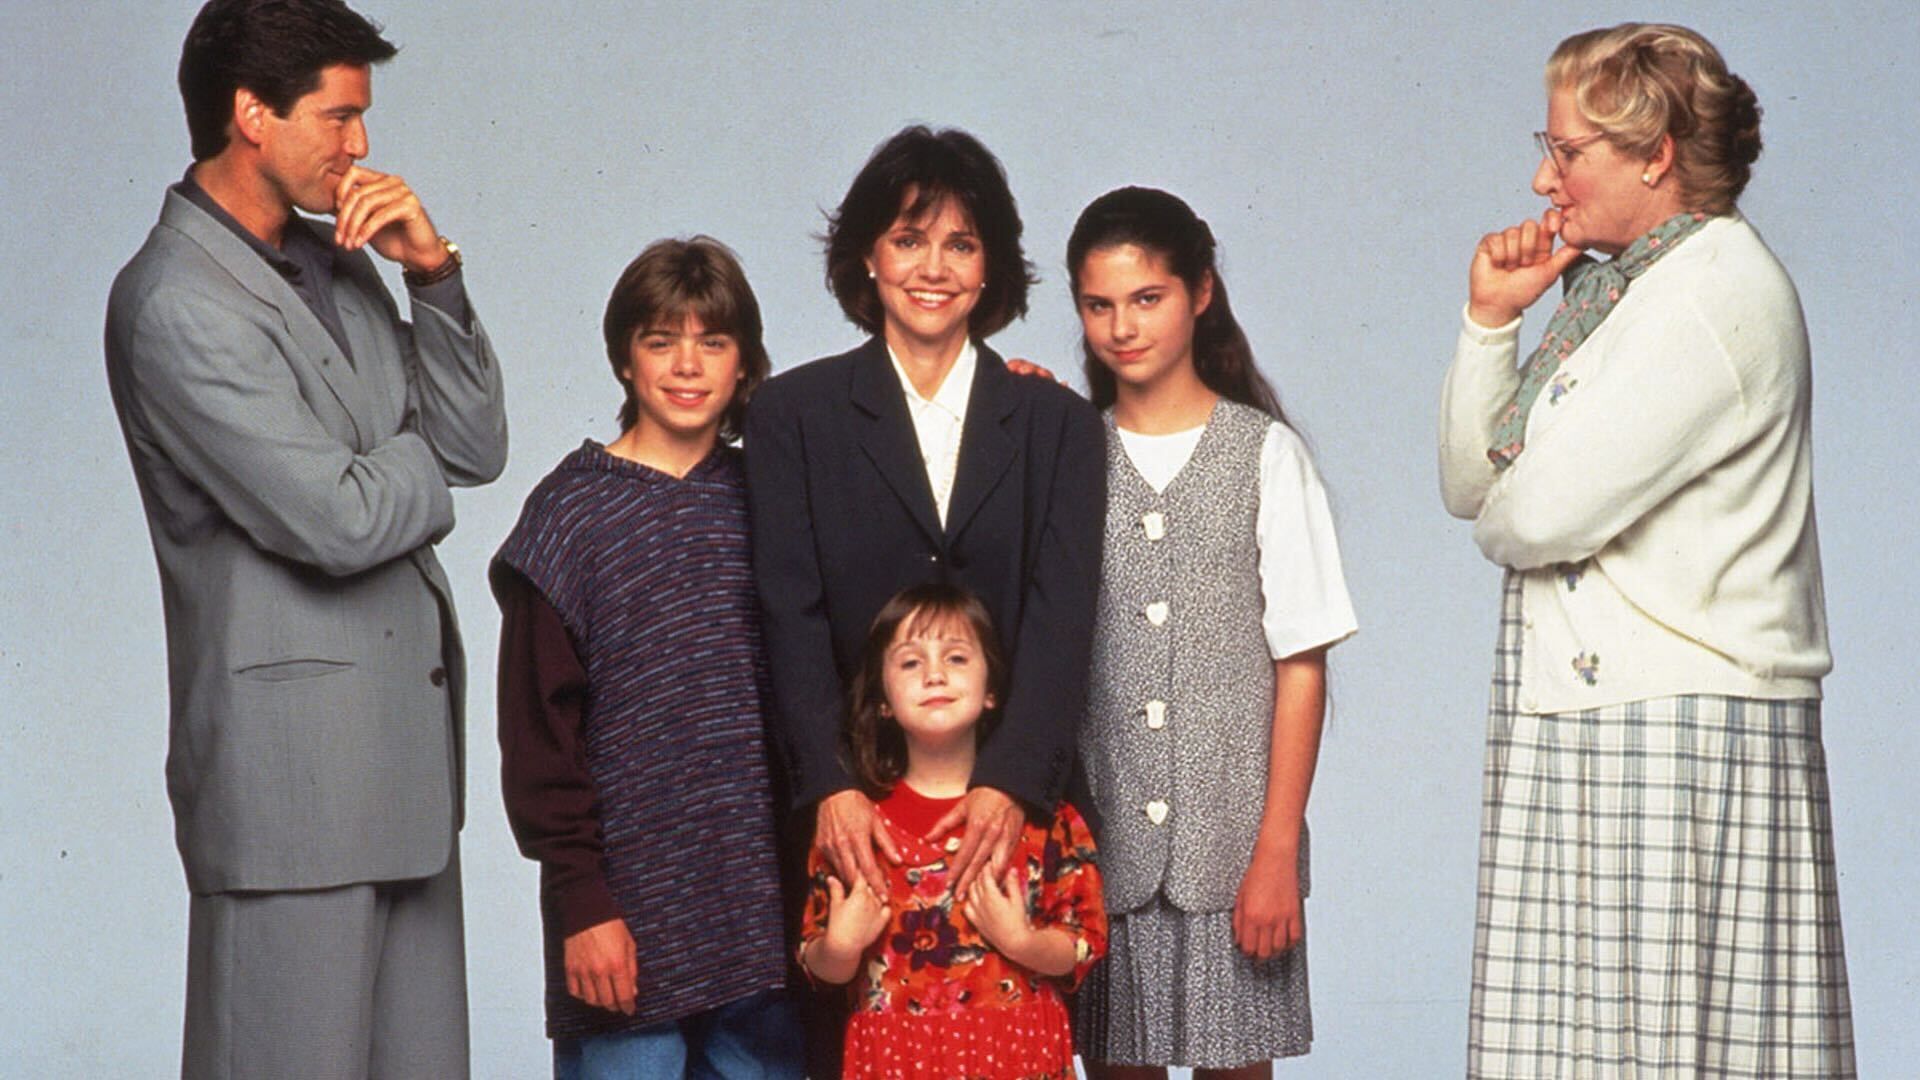 The cast of Mrs. Doubtfire in a publicity shot